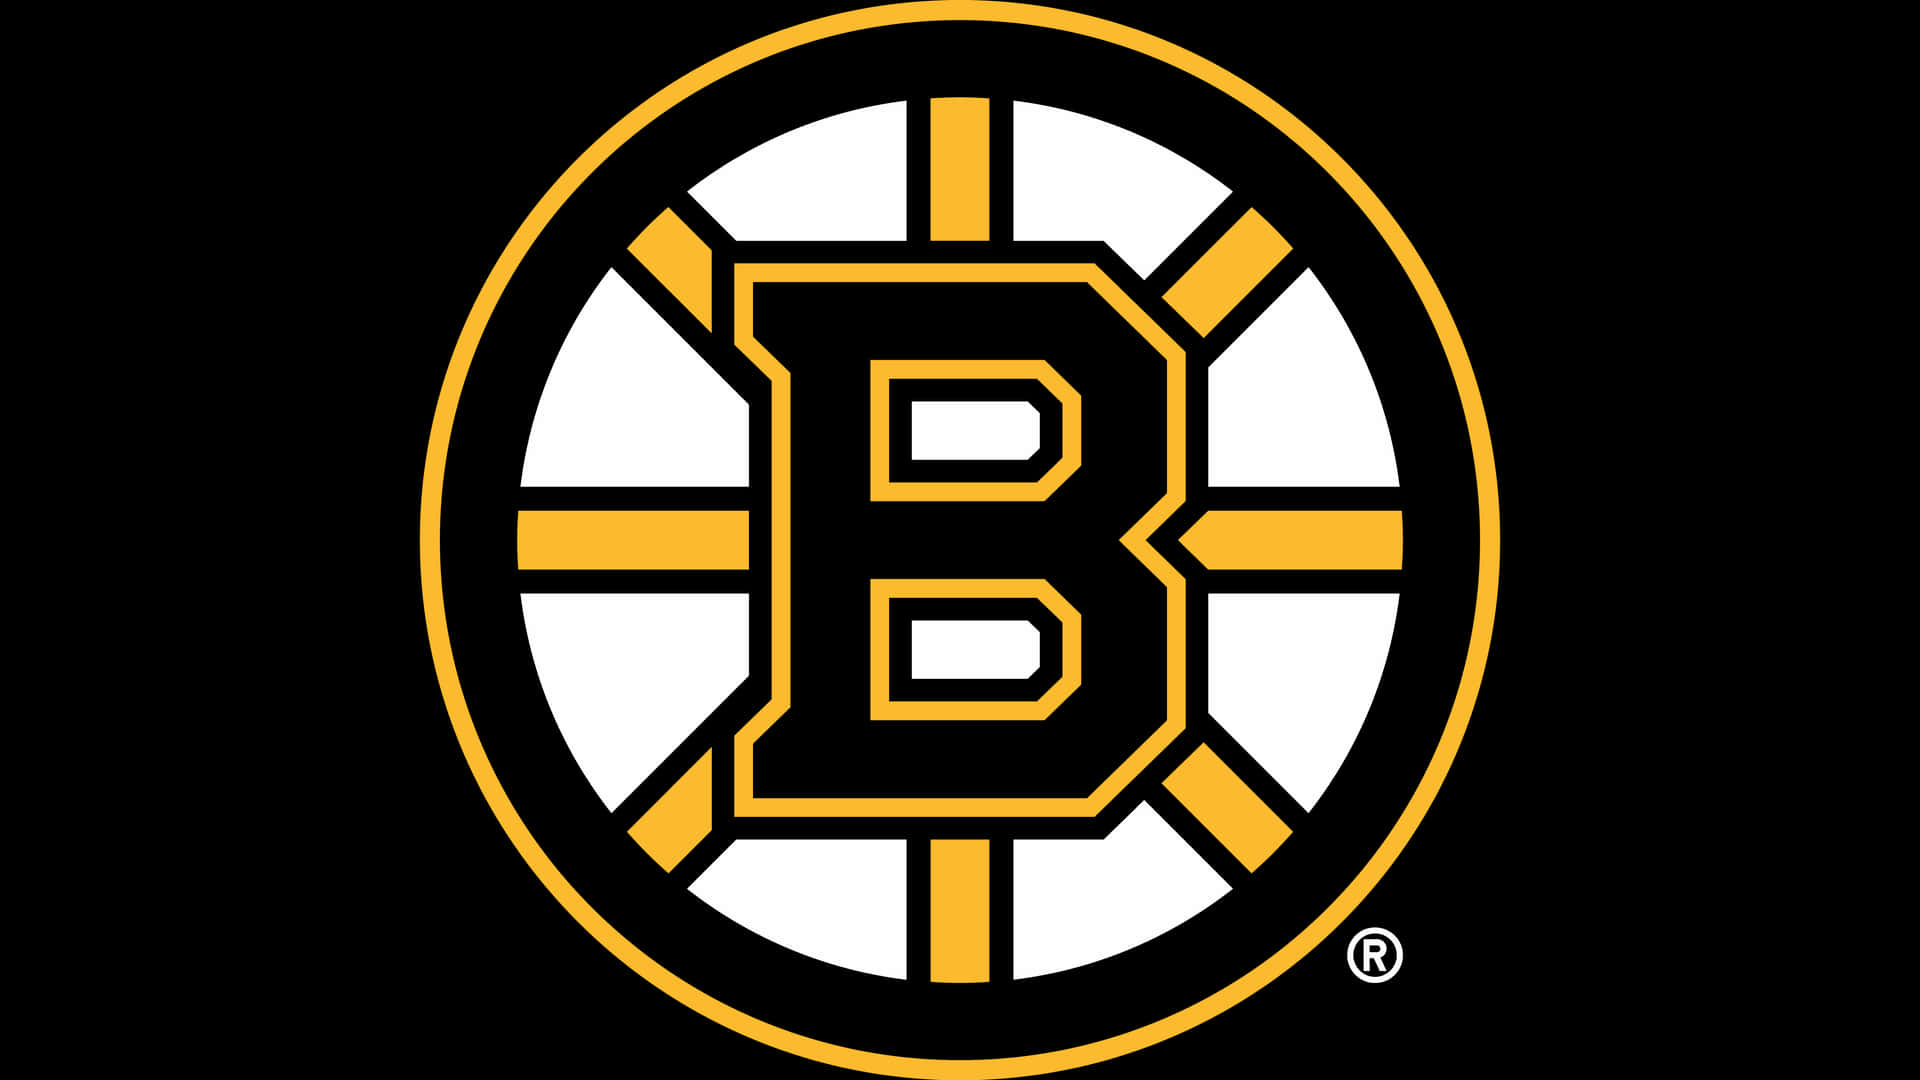 The Boston Bruins proudly display their colors on the ice.